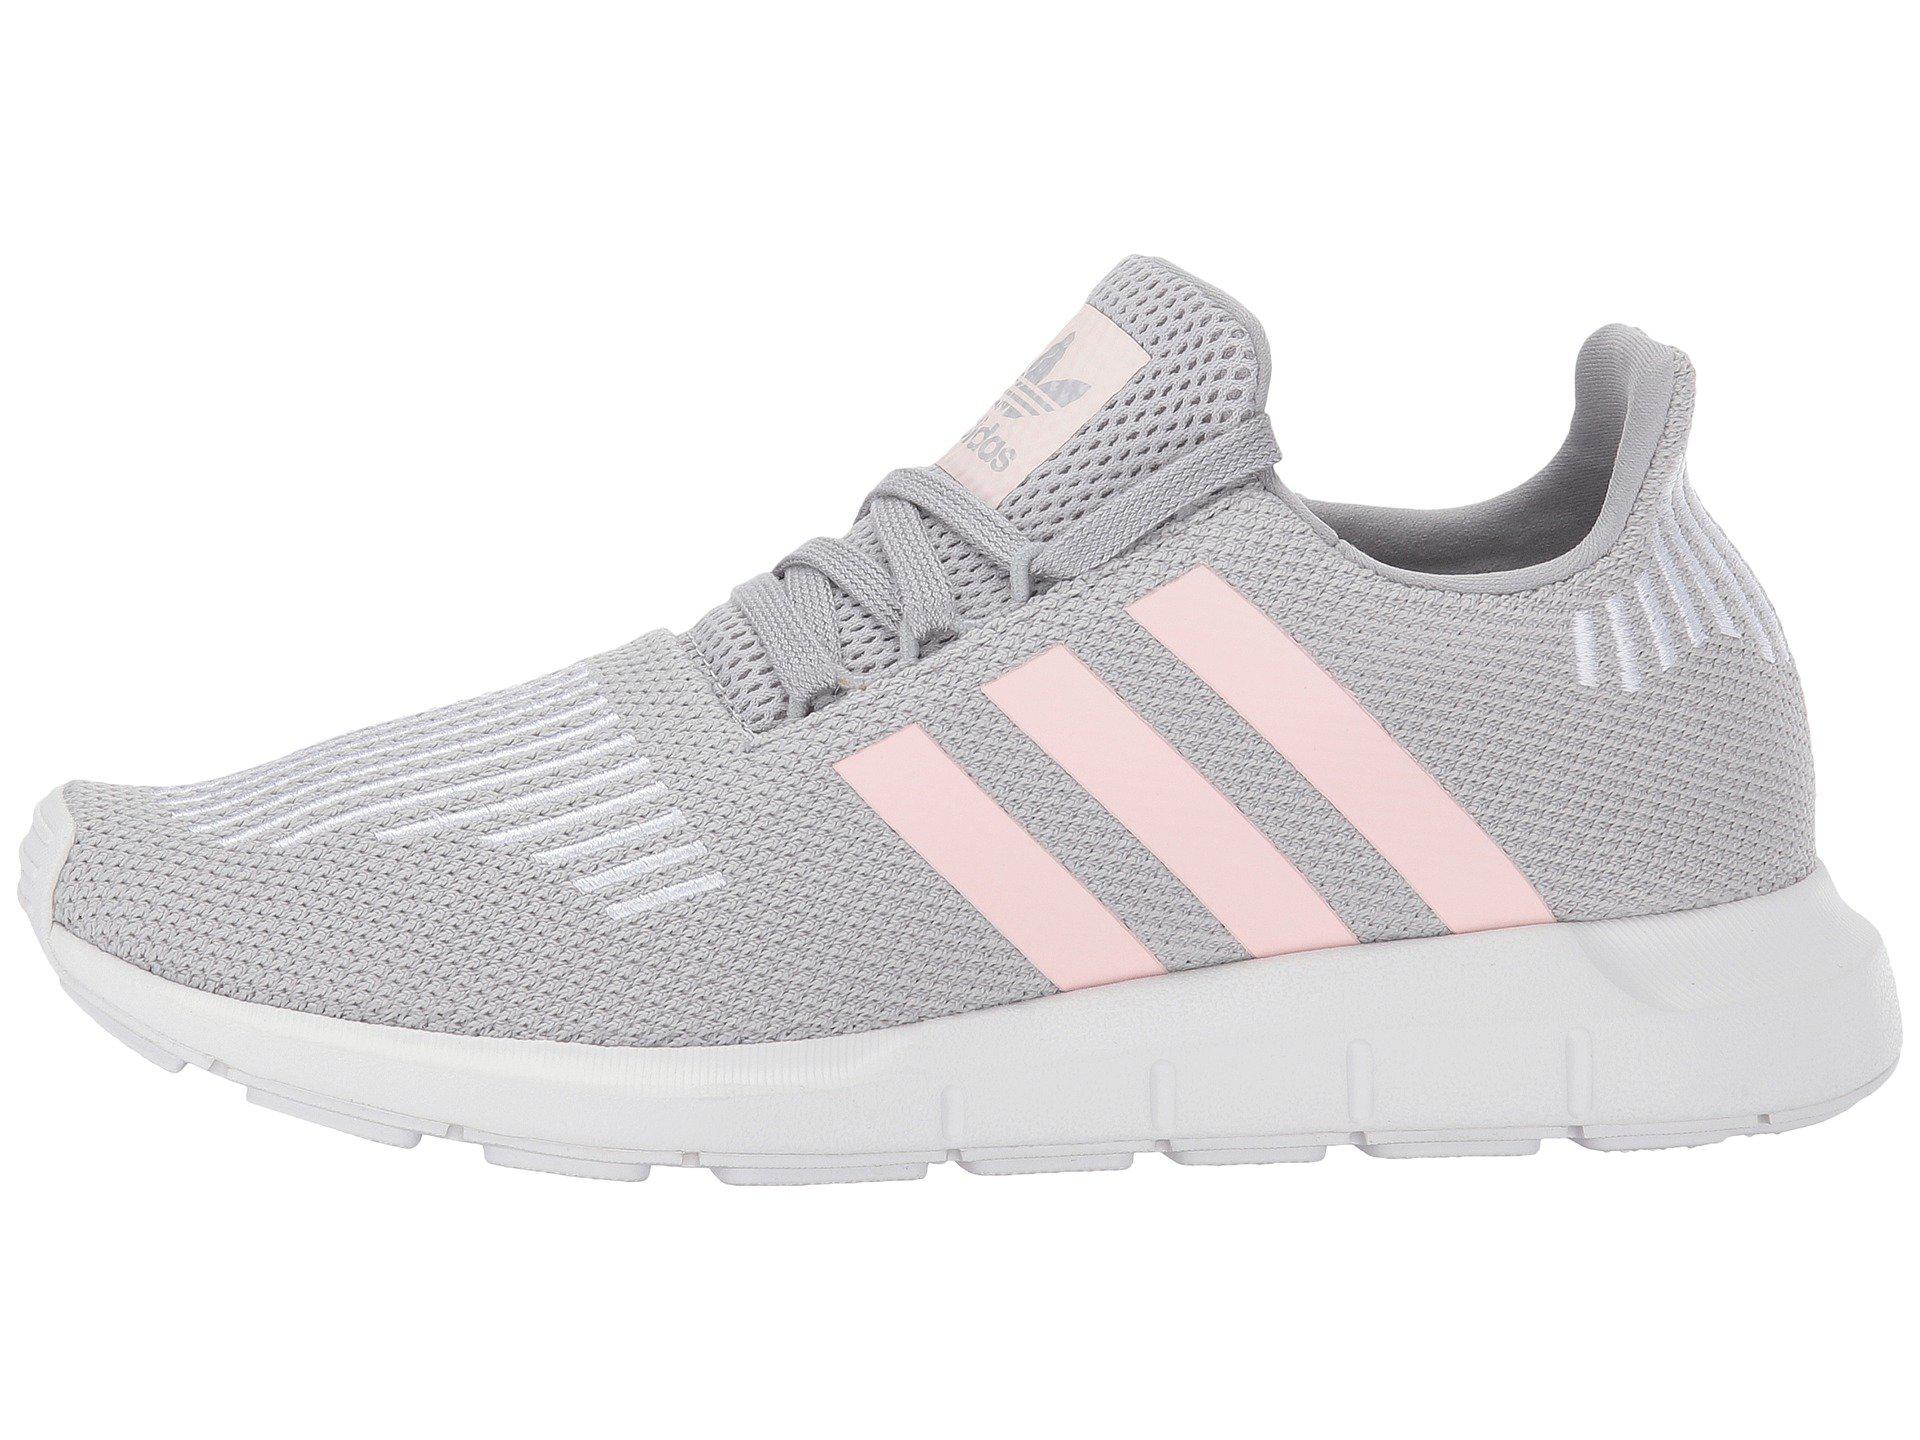 adidas Originals Rubber Swift Run W in Grey Two/Ice Pink/White (Gray) - Lyst